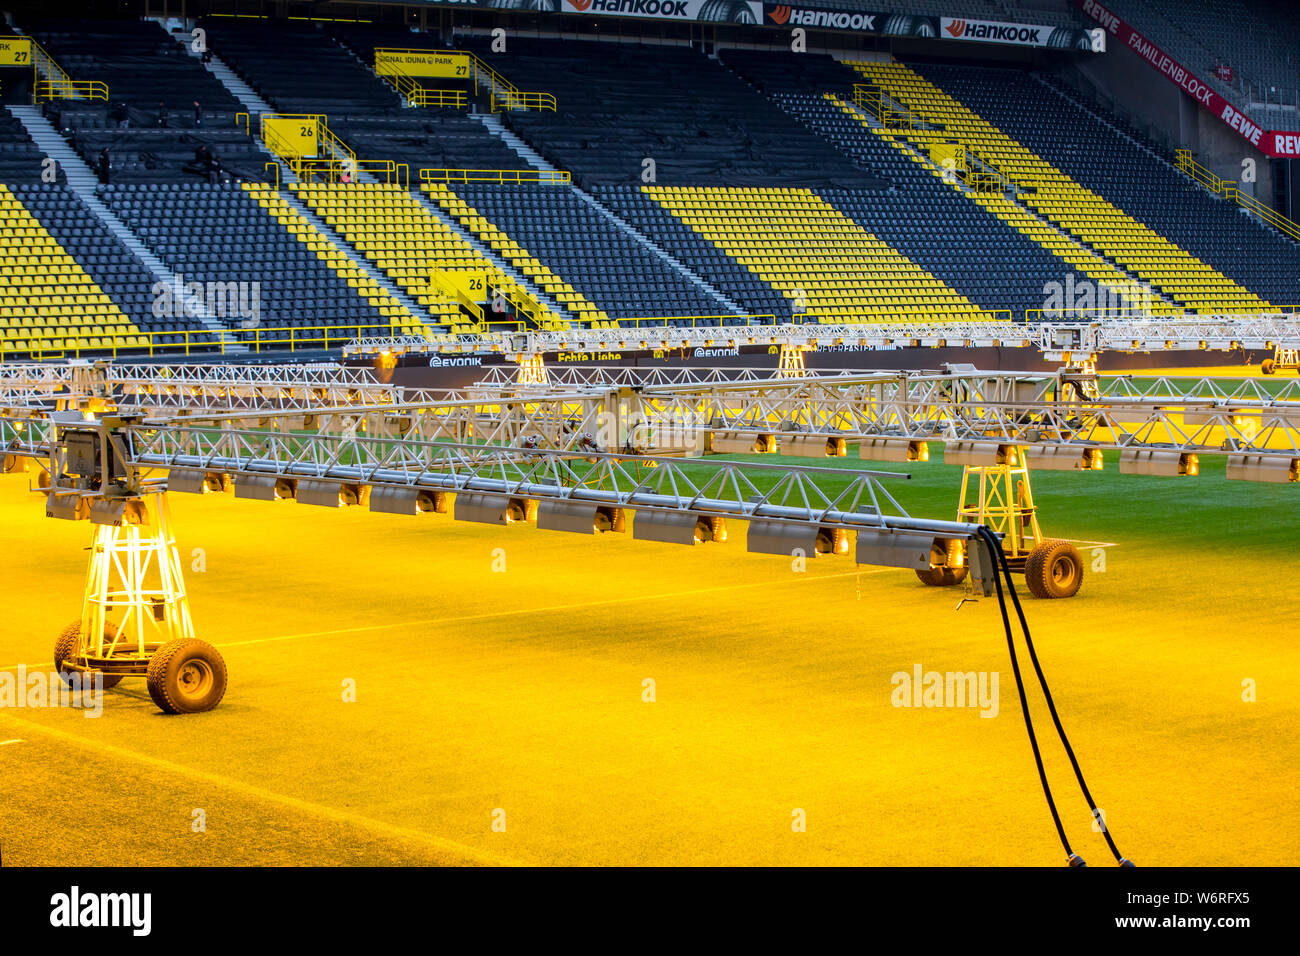 Signal-Iduna-Park, Westfalenstadion, football stadium of BVB Borussia Dortmund, the lawn of the pitch is illuminated with special lamps, for lawn care Stock Photo